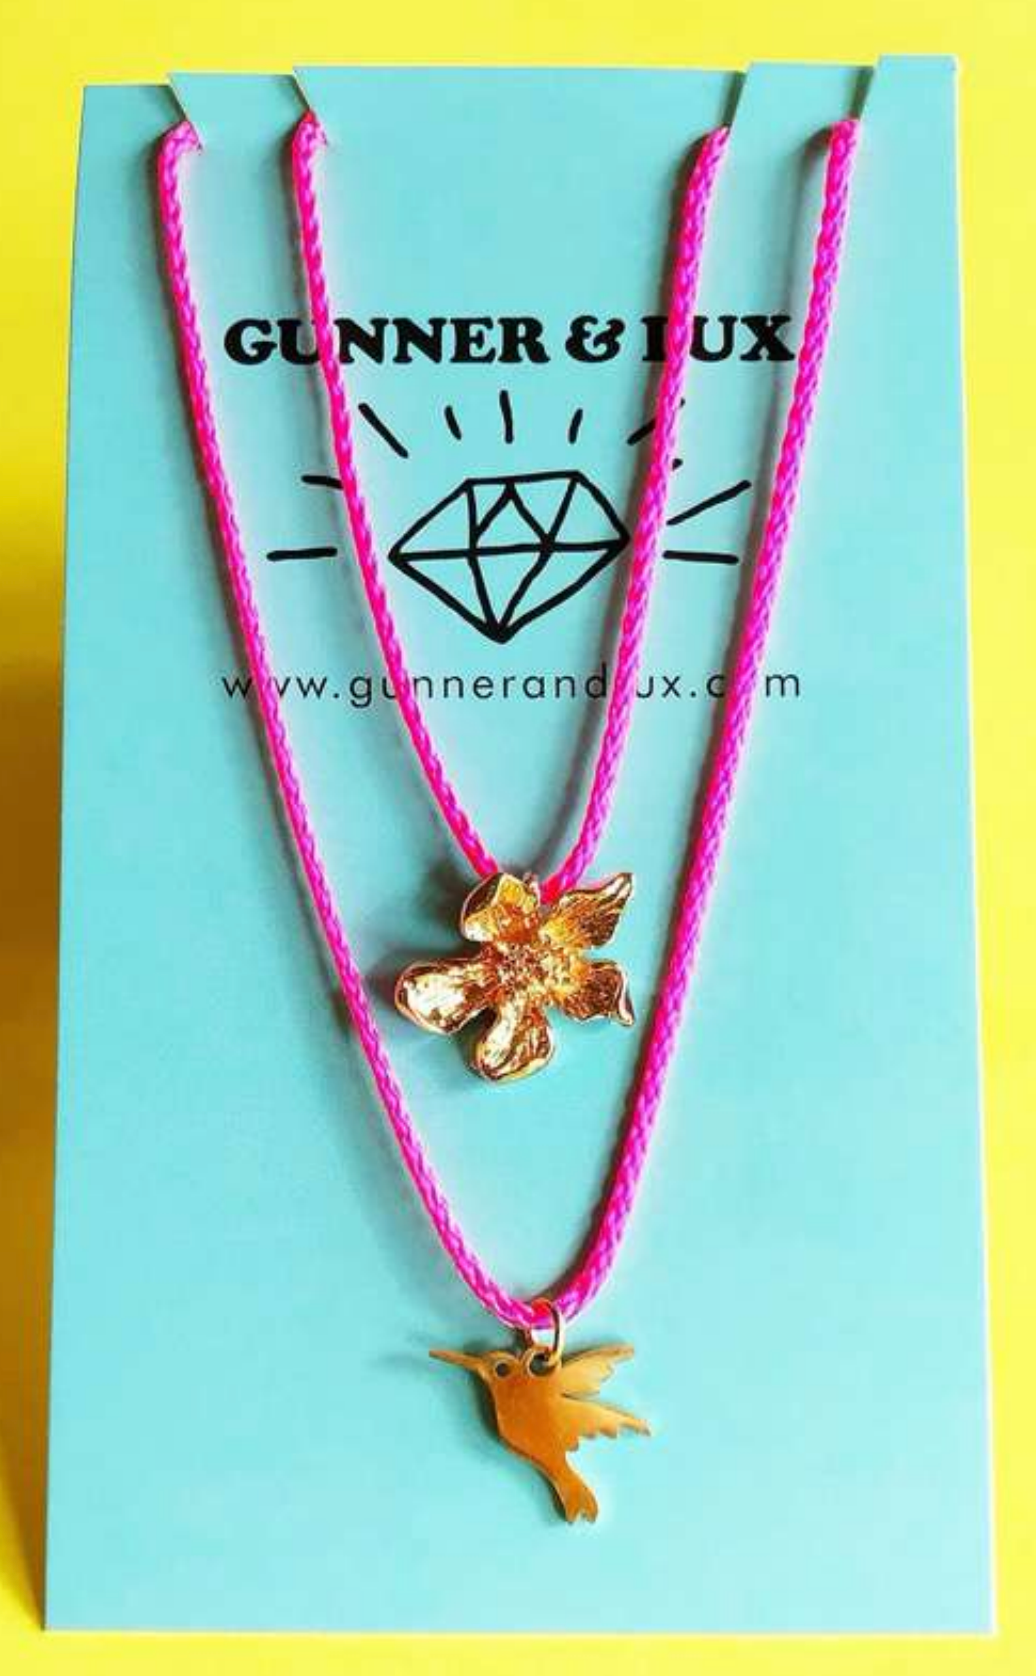 Gunner and Lux delicates necklace flower and hummingbird